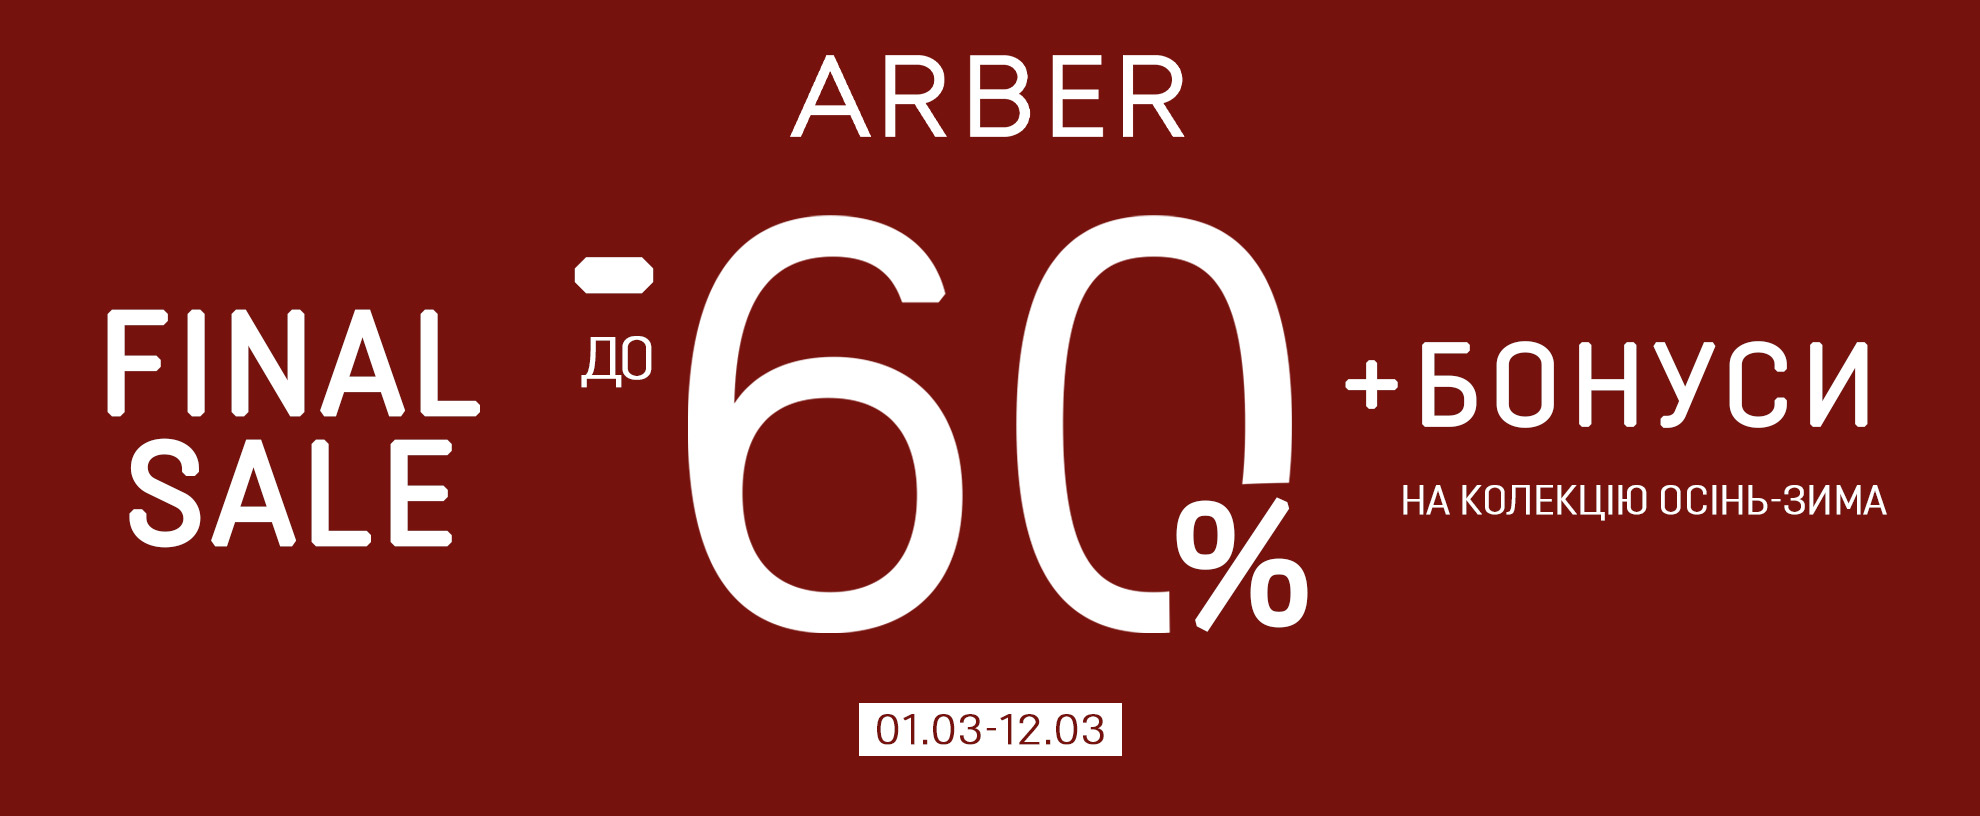 Final SALE in ARBER with discounts up to -60%